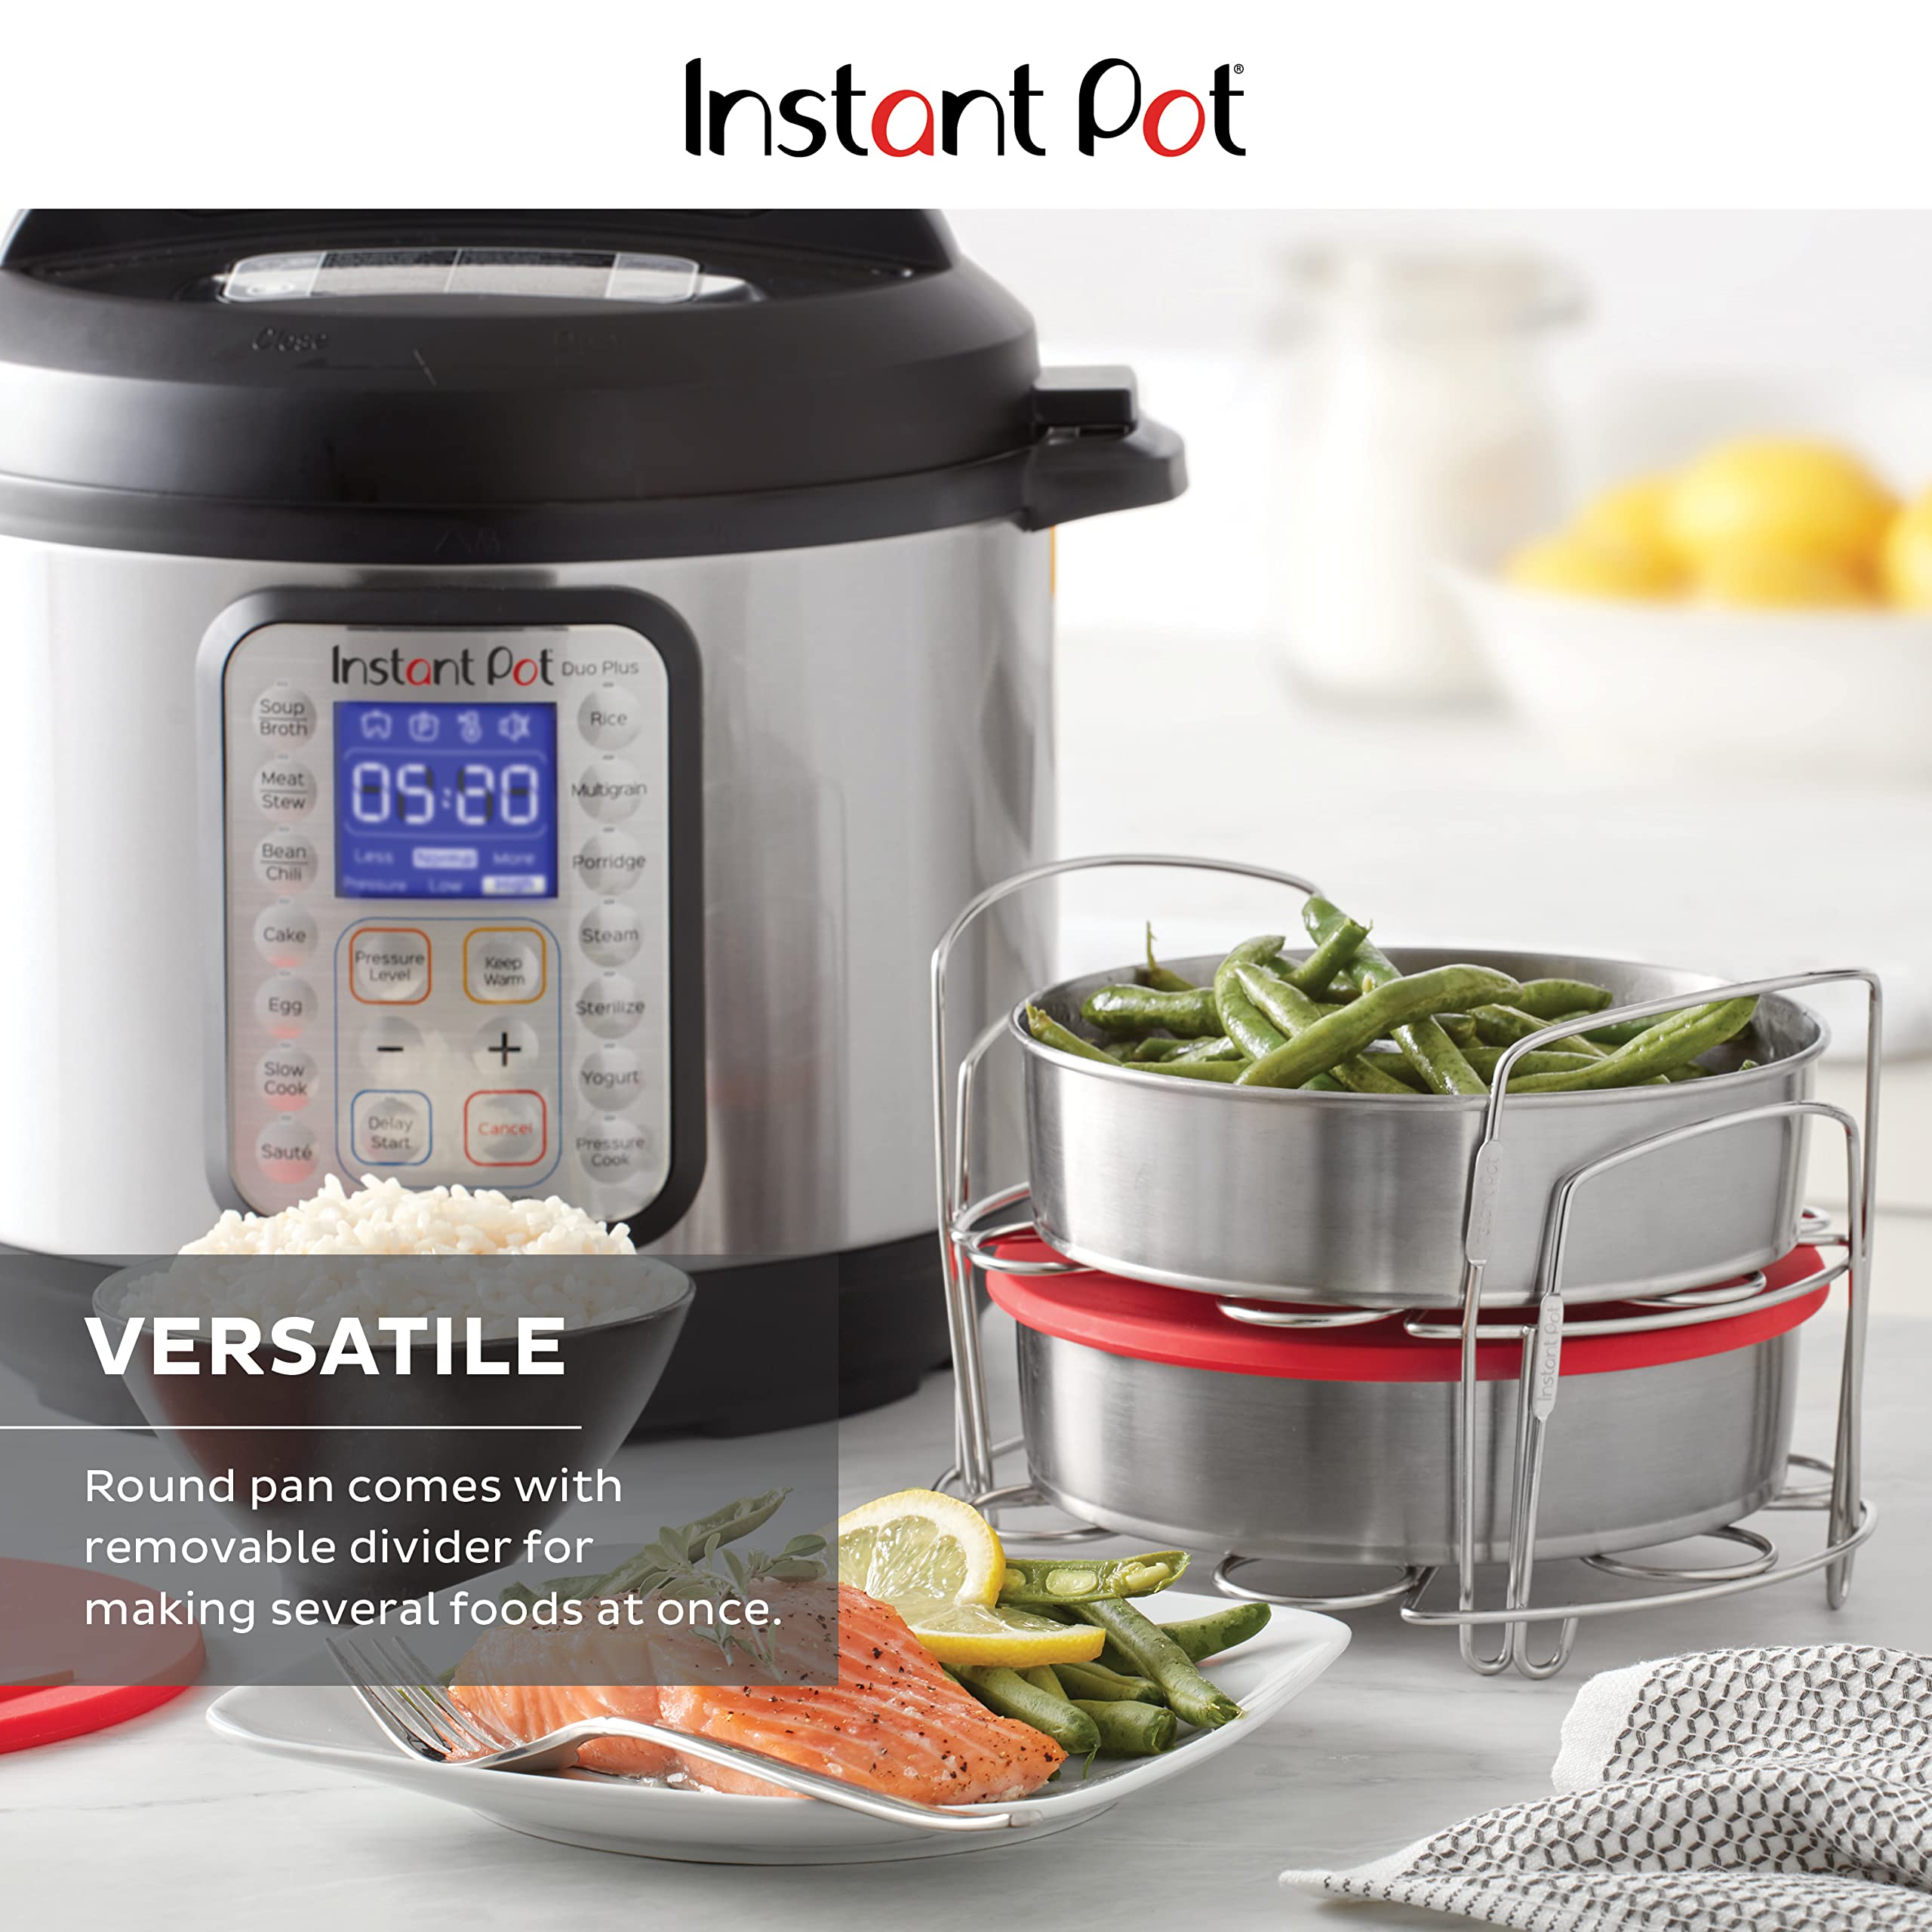 Instant Pot Official Cook/Bake Set, 8-Piece, Compatible with 6-quart and 8-quart cookers, Red